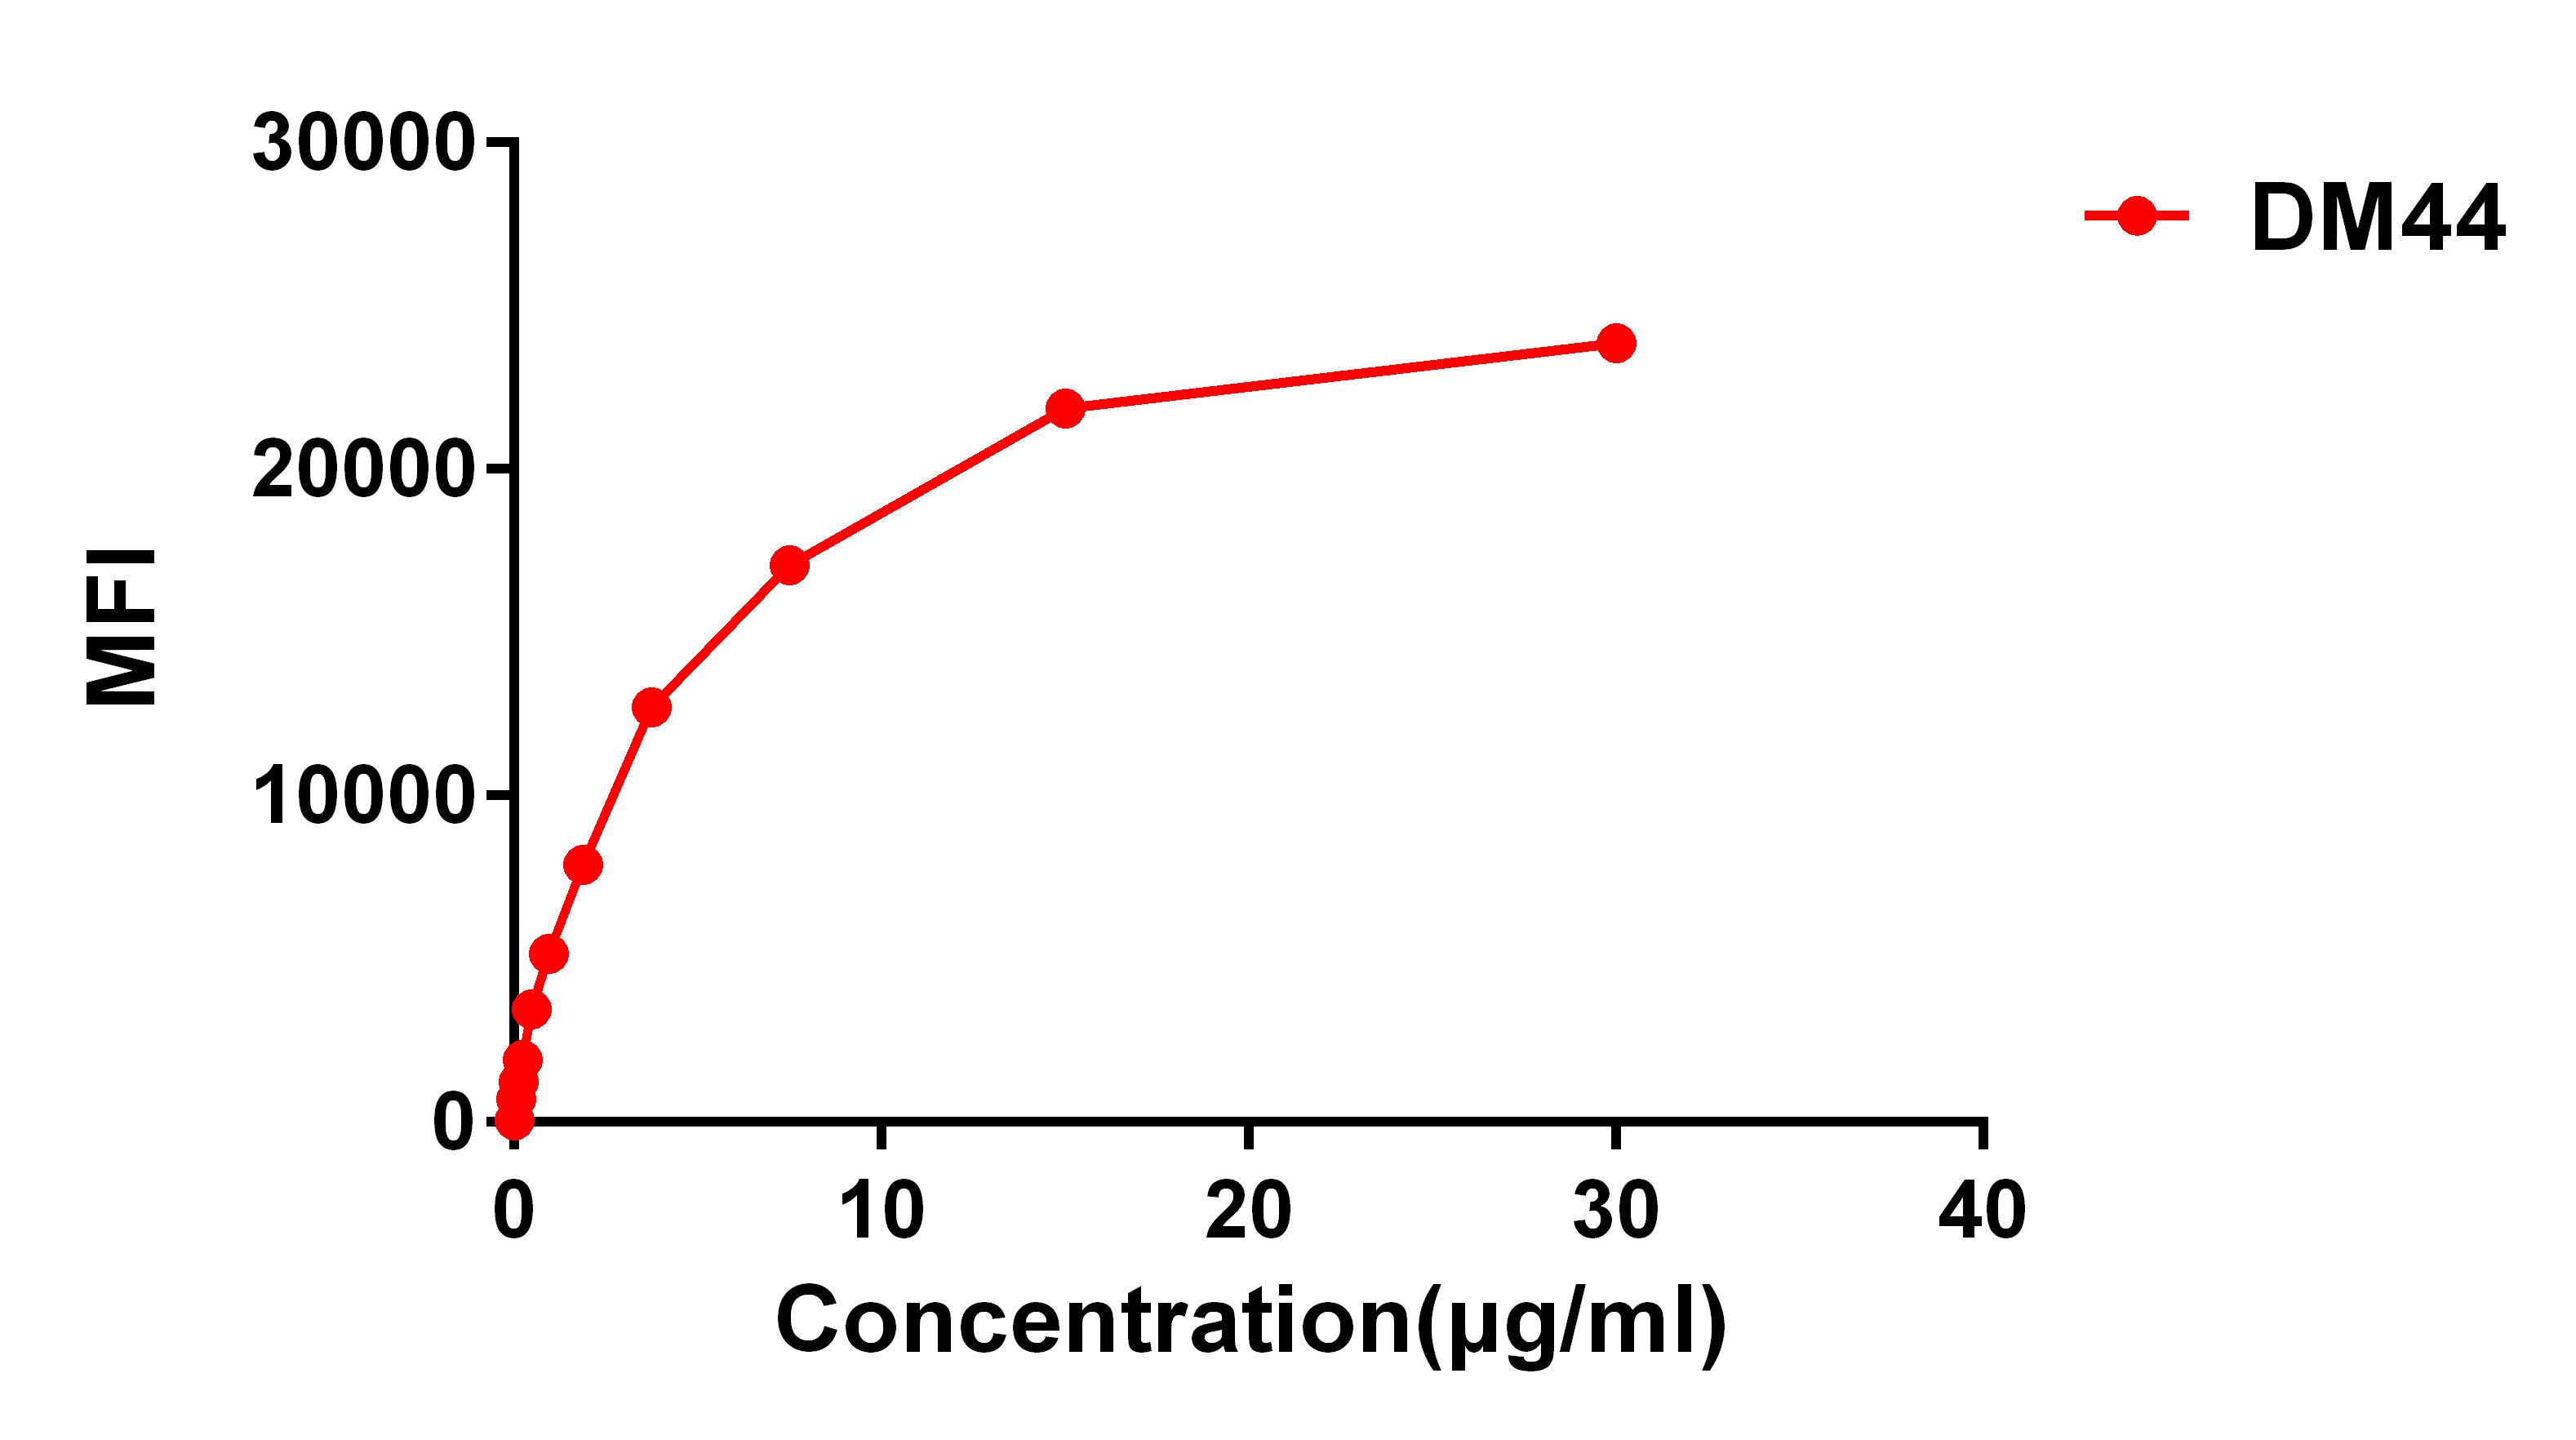 Figure 2. FACS data of serially titrated Rabbit anti-CD48 monoclonal antibody (clone: DM44) on H929 cells. The Y-axis represents the mean fluorescence intensity (MFI) while the X-axis represents the concentration of IgG used.